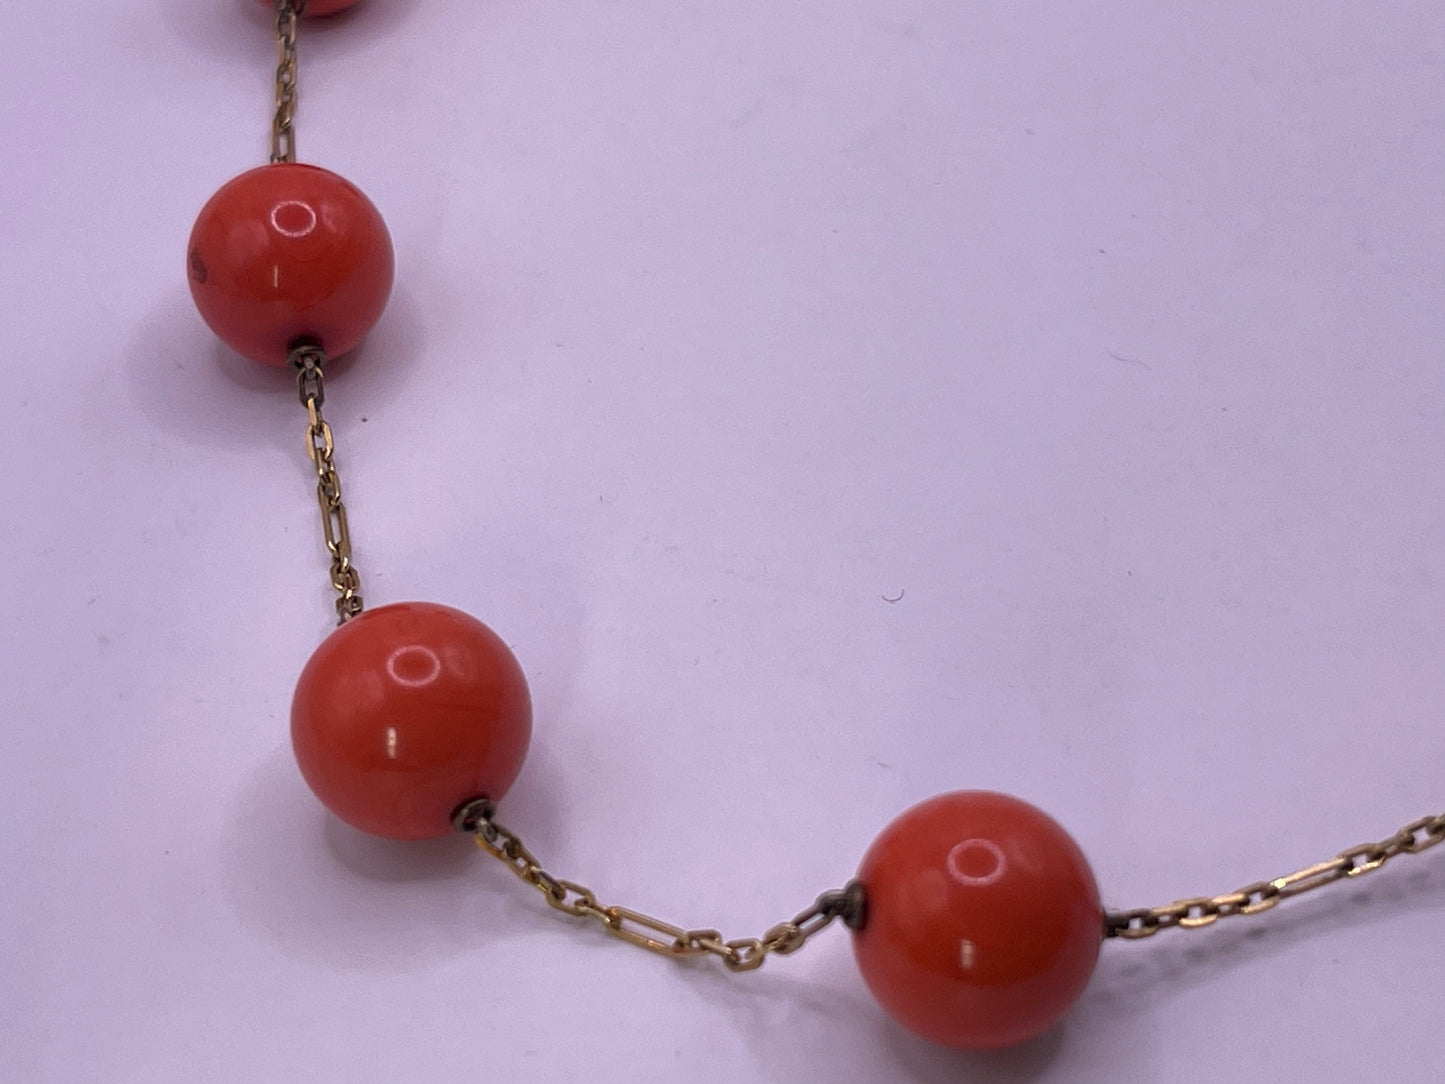 A necklace with coral beads on a 14kt chain